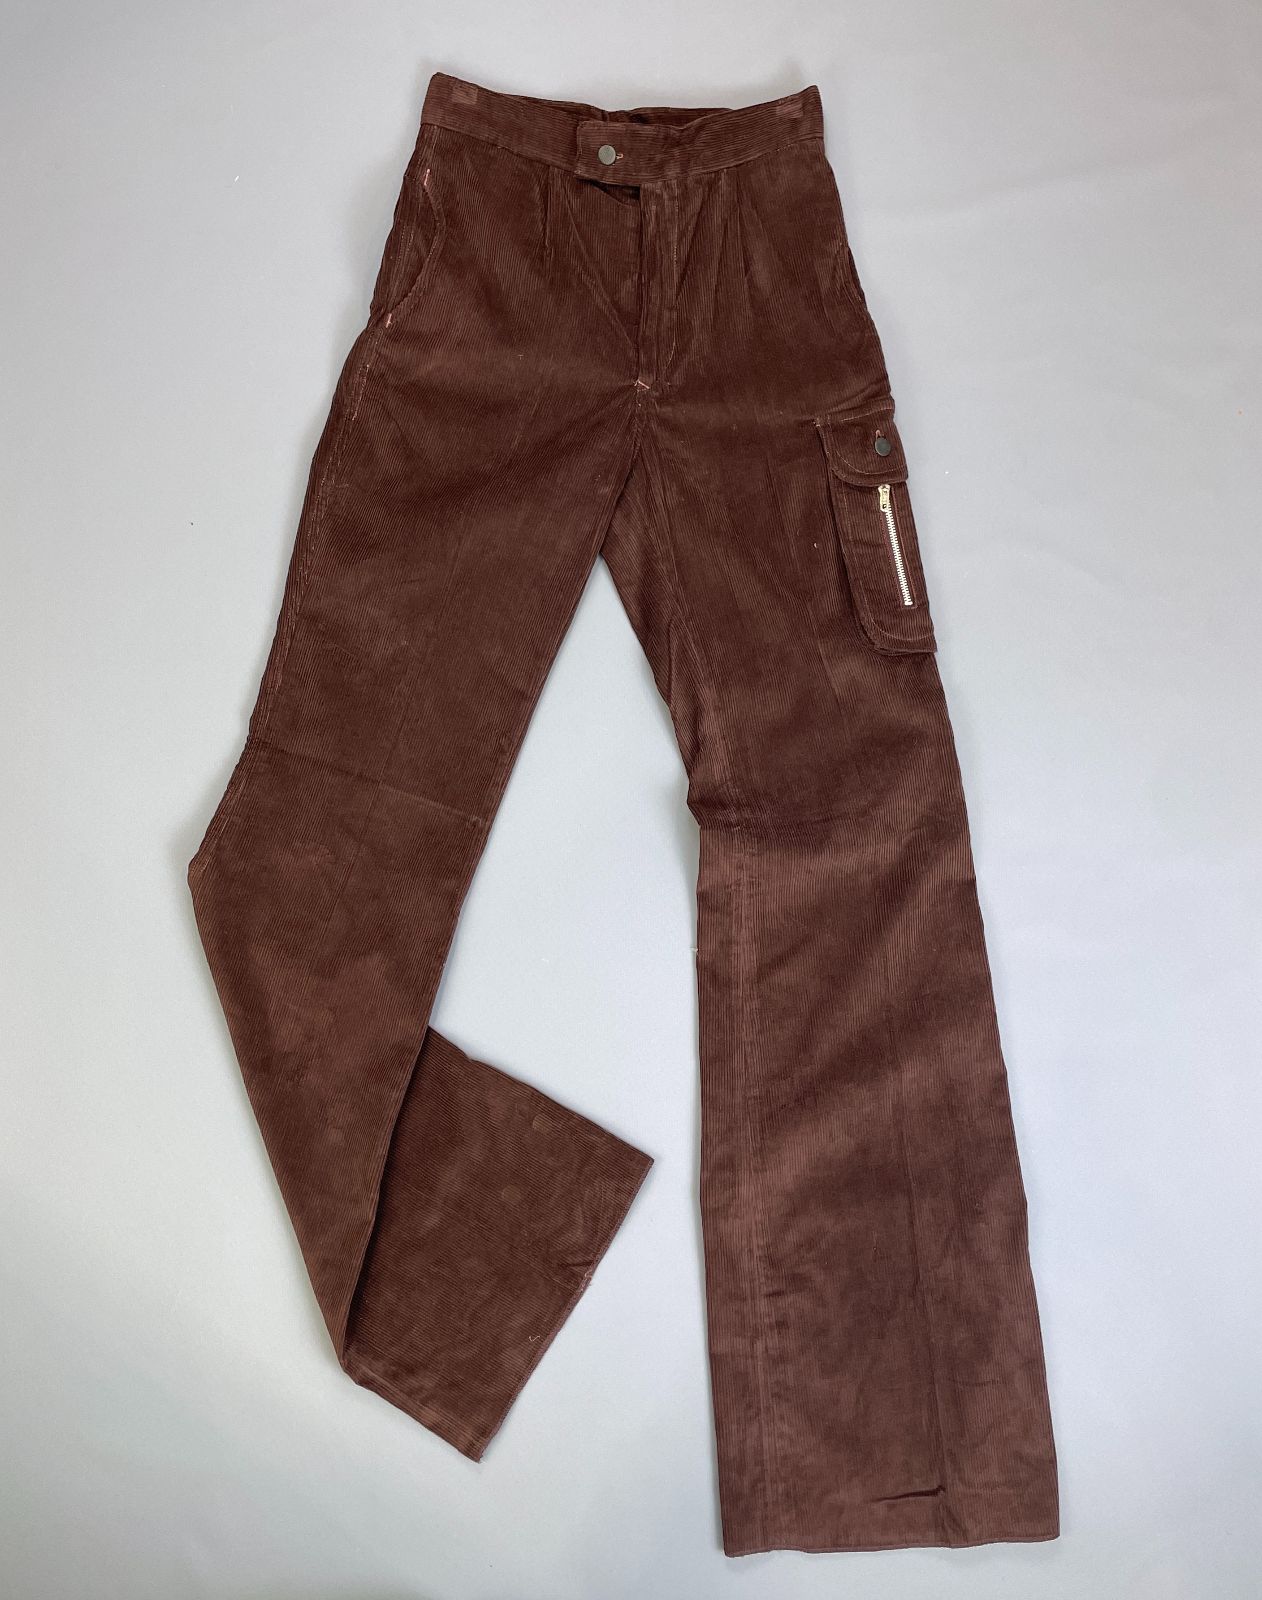 product details: DEADSTOCK 1970S BROWN CORDUROY BELL BOTTOM TROUSER PANTS W/ ROUNDED POCKET DESIGN photo